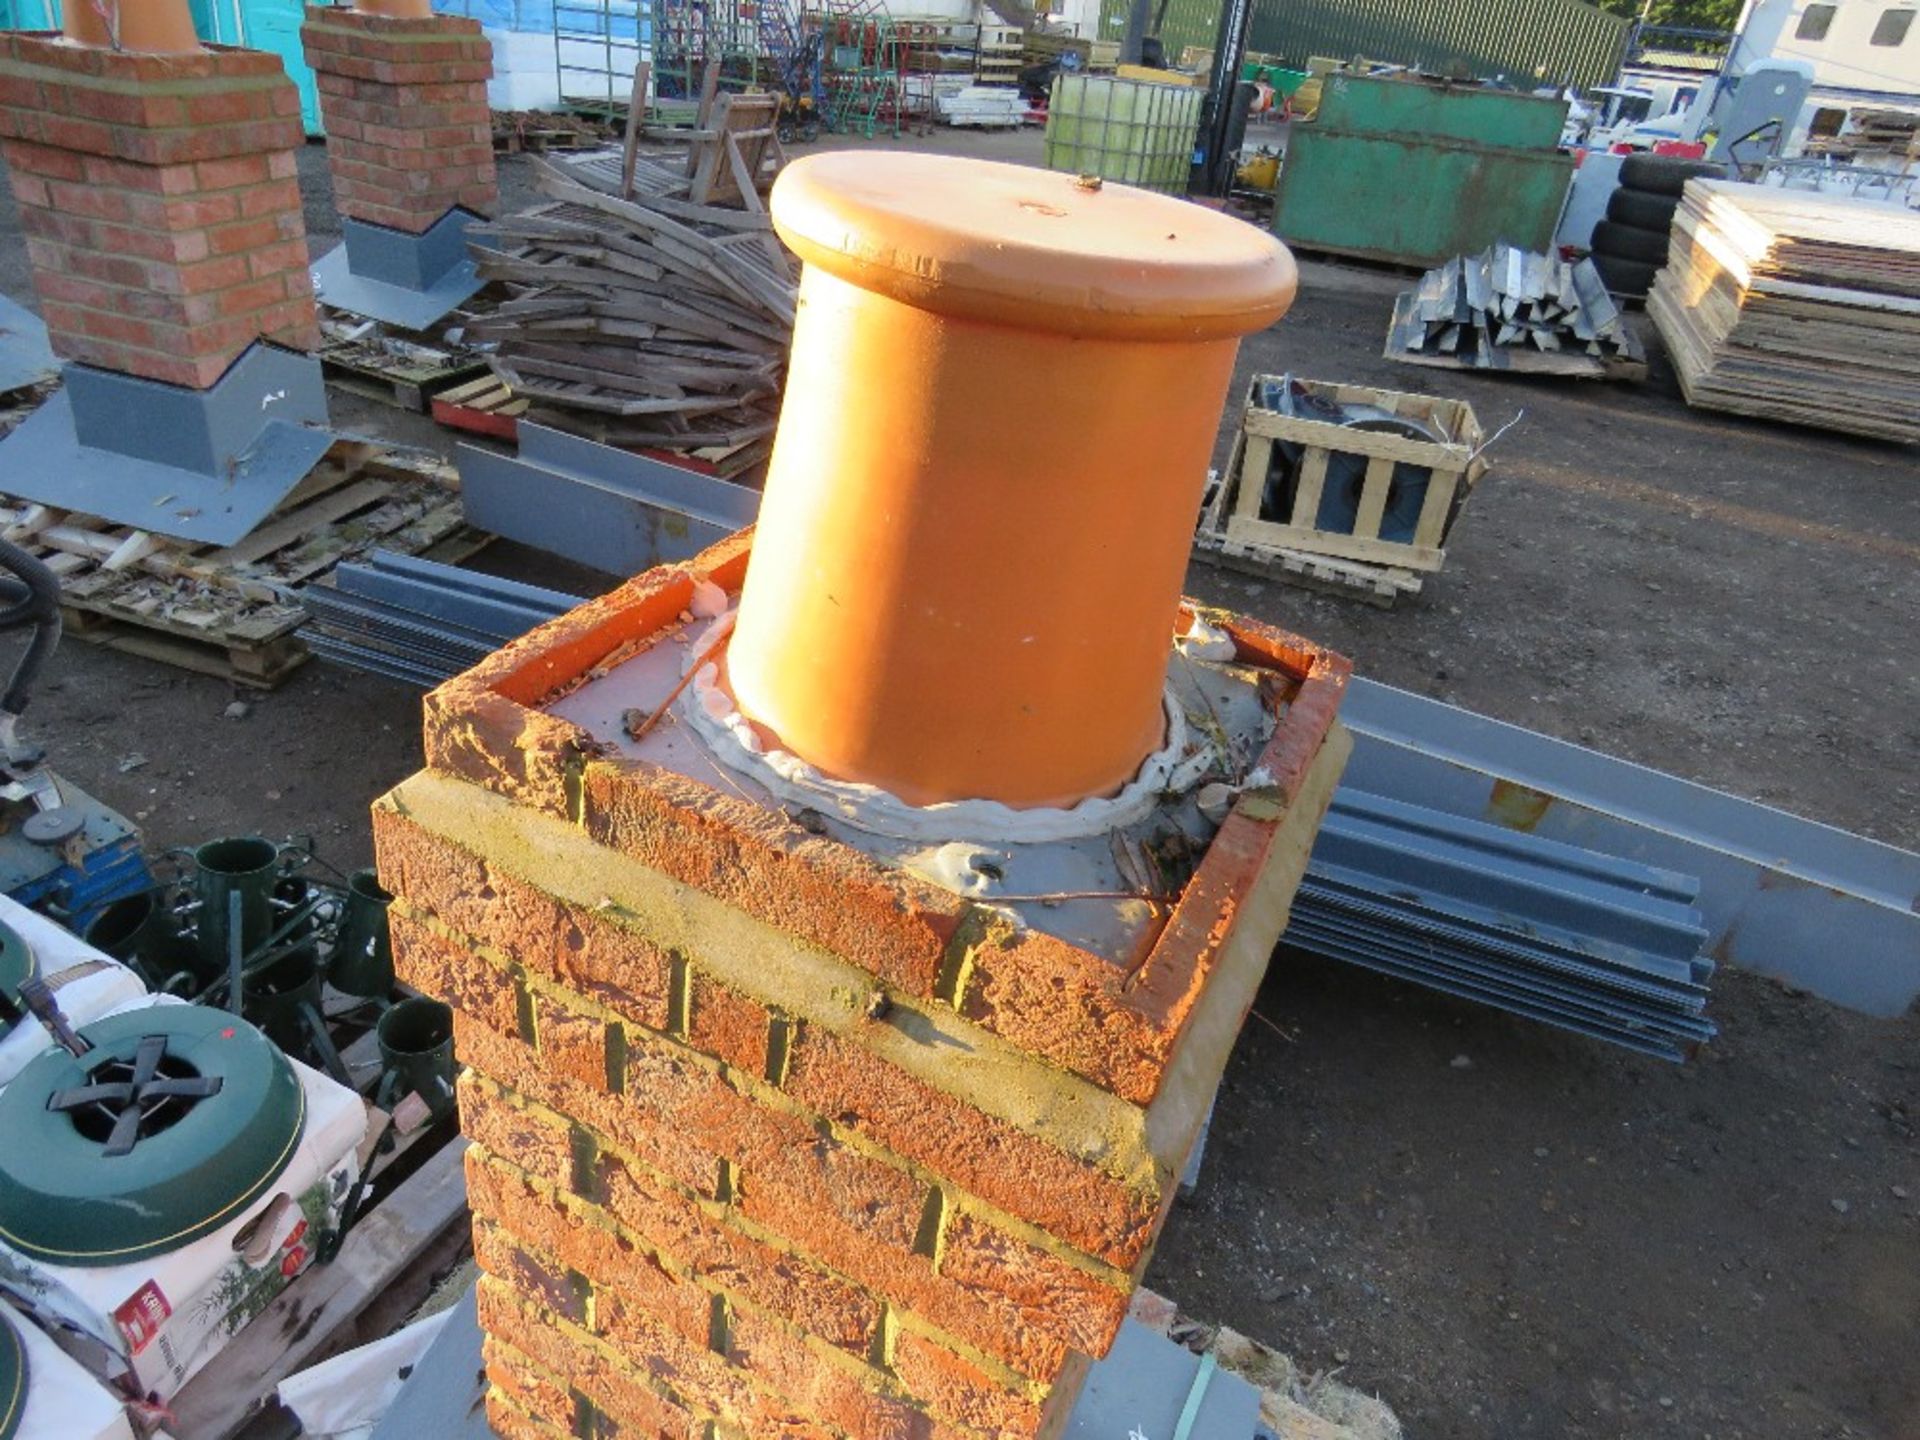 CGFMA FIBRE GLASS CHIMNEY STACK. GRP CENTRE AND BASE WITH REAL BRICK FACING. BELIEVED TO BE 25 DEGR - Image 2 of 3